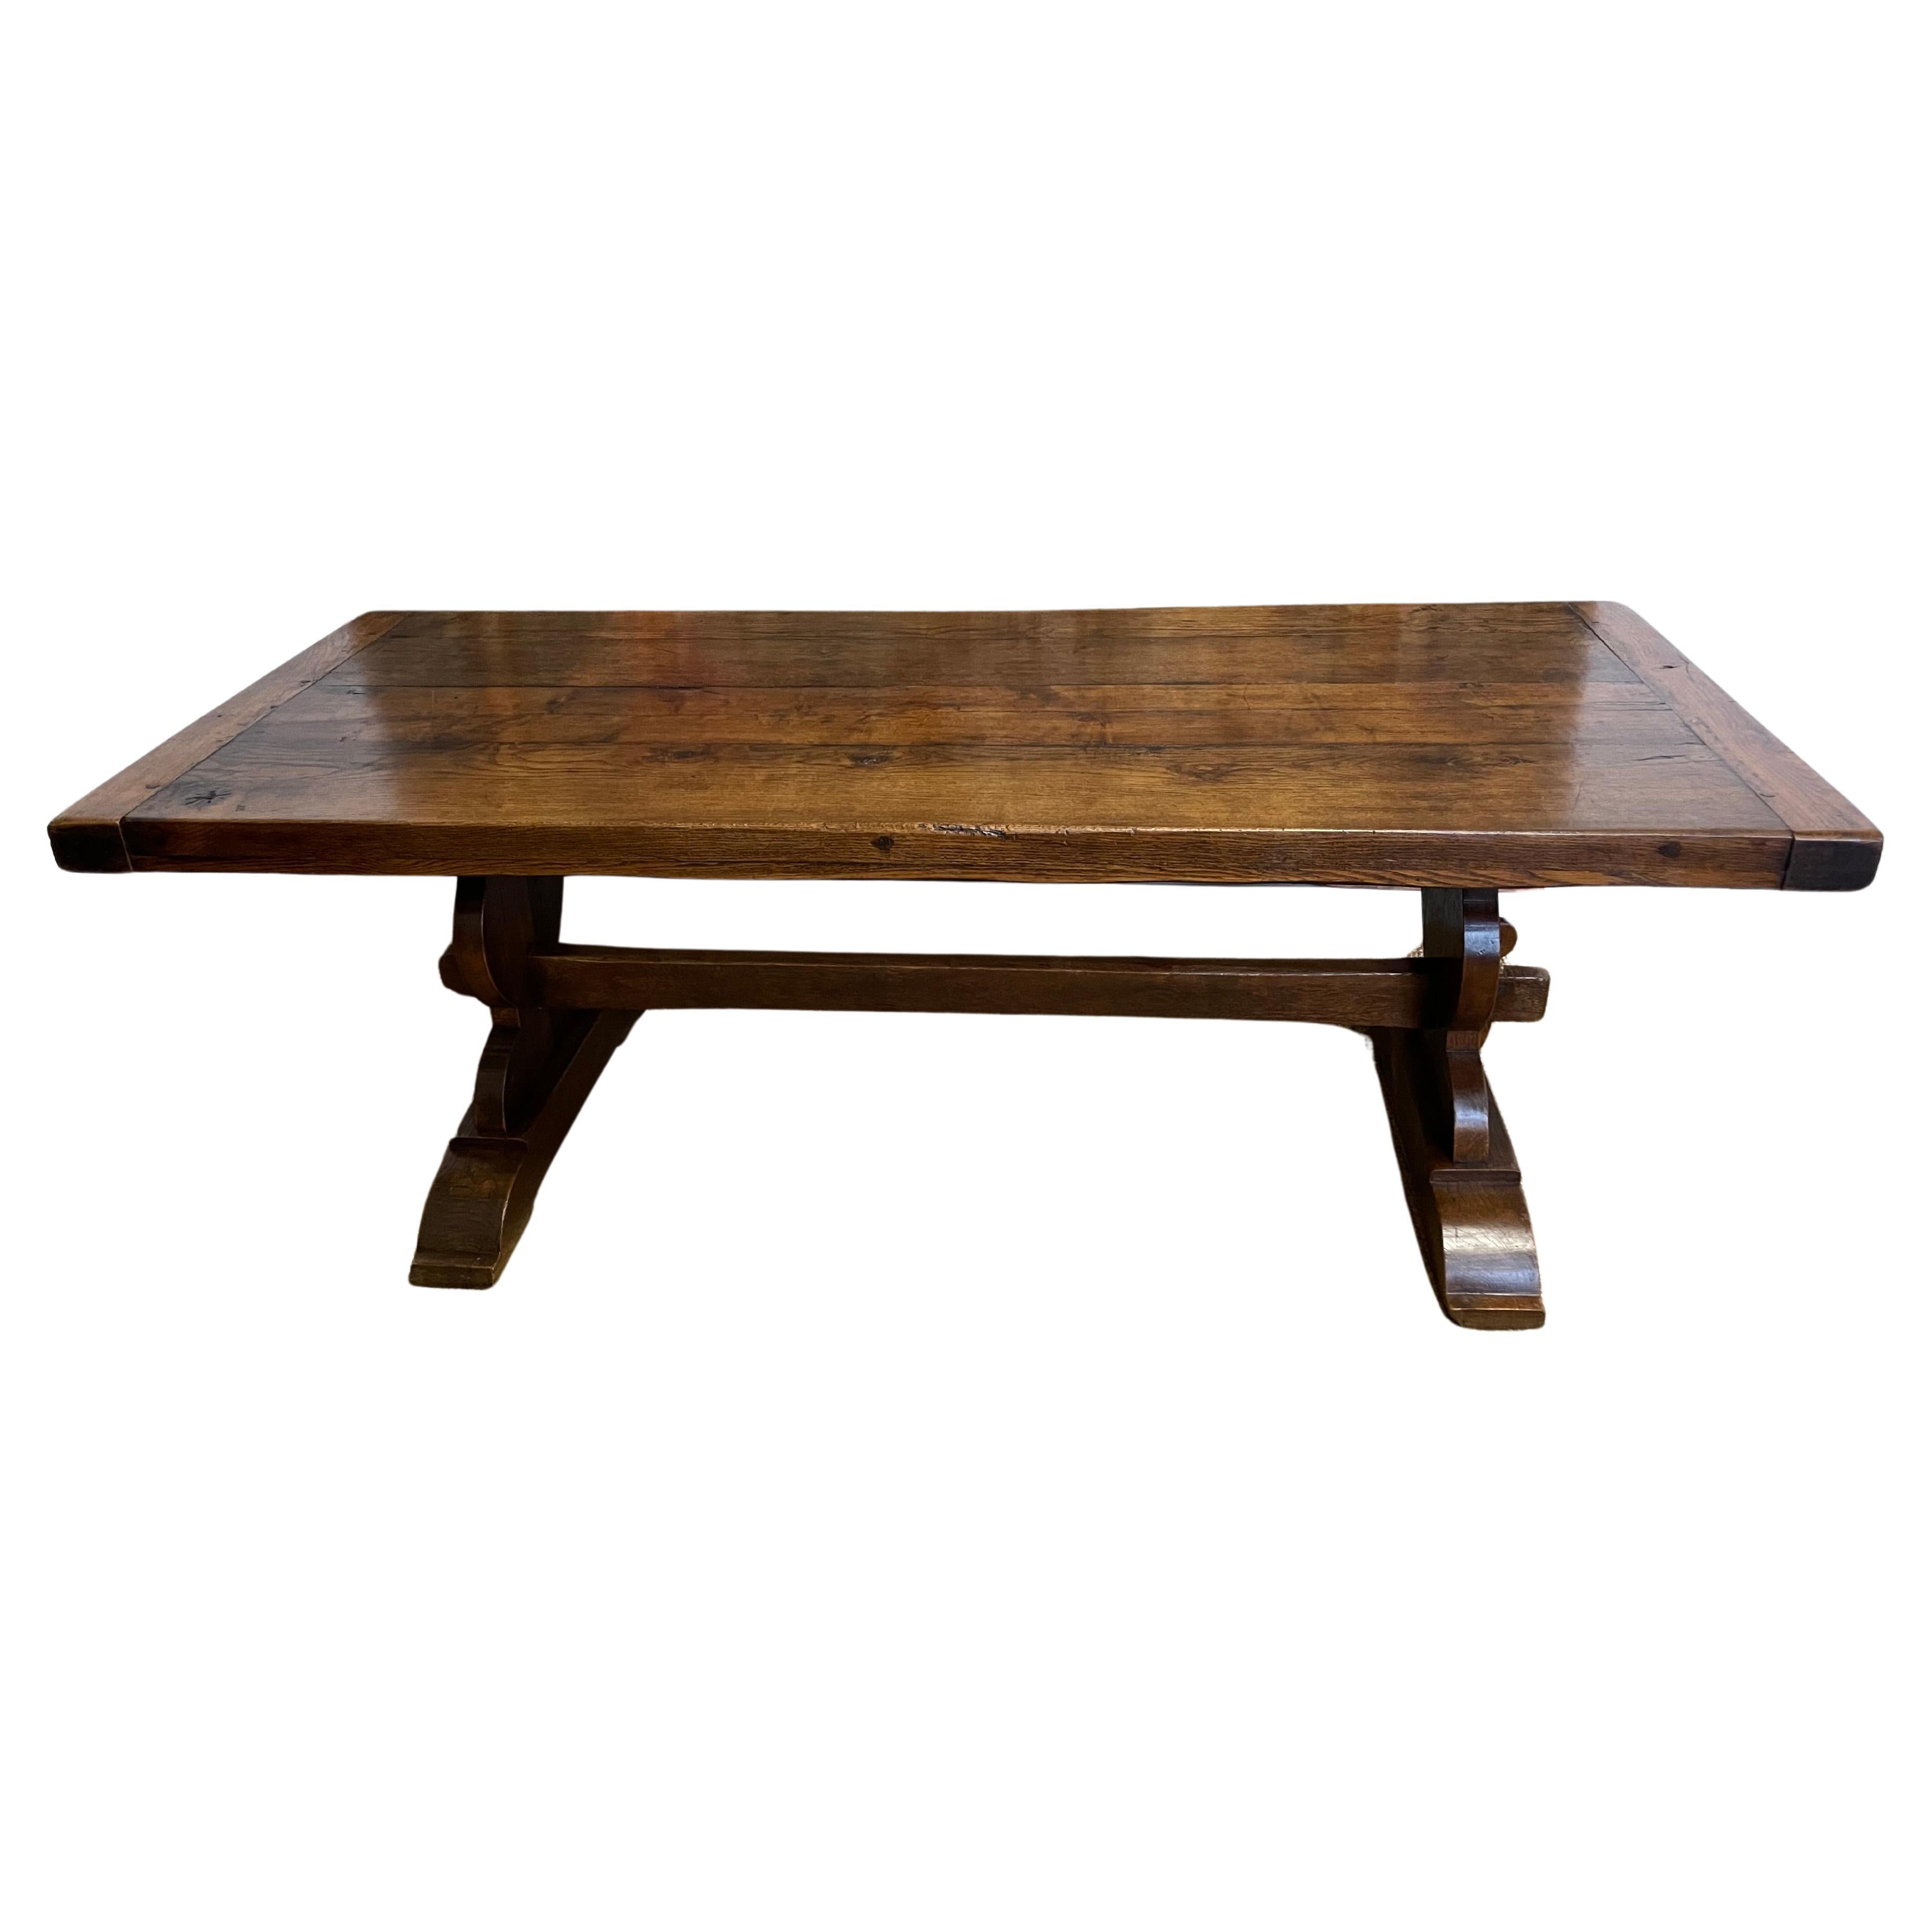 Early 20th century polished oak refectory table 